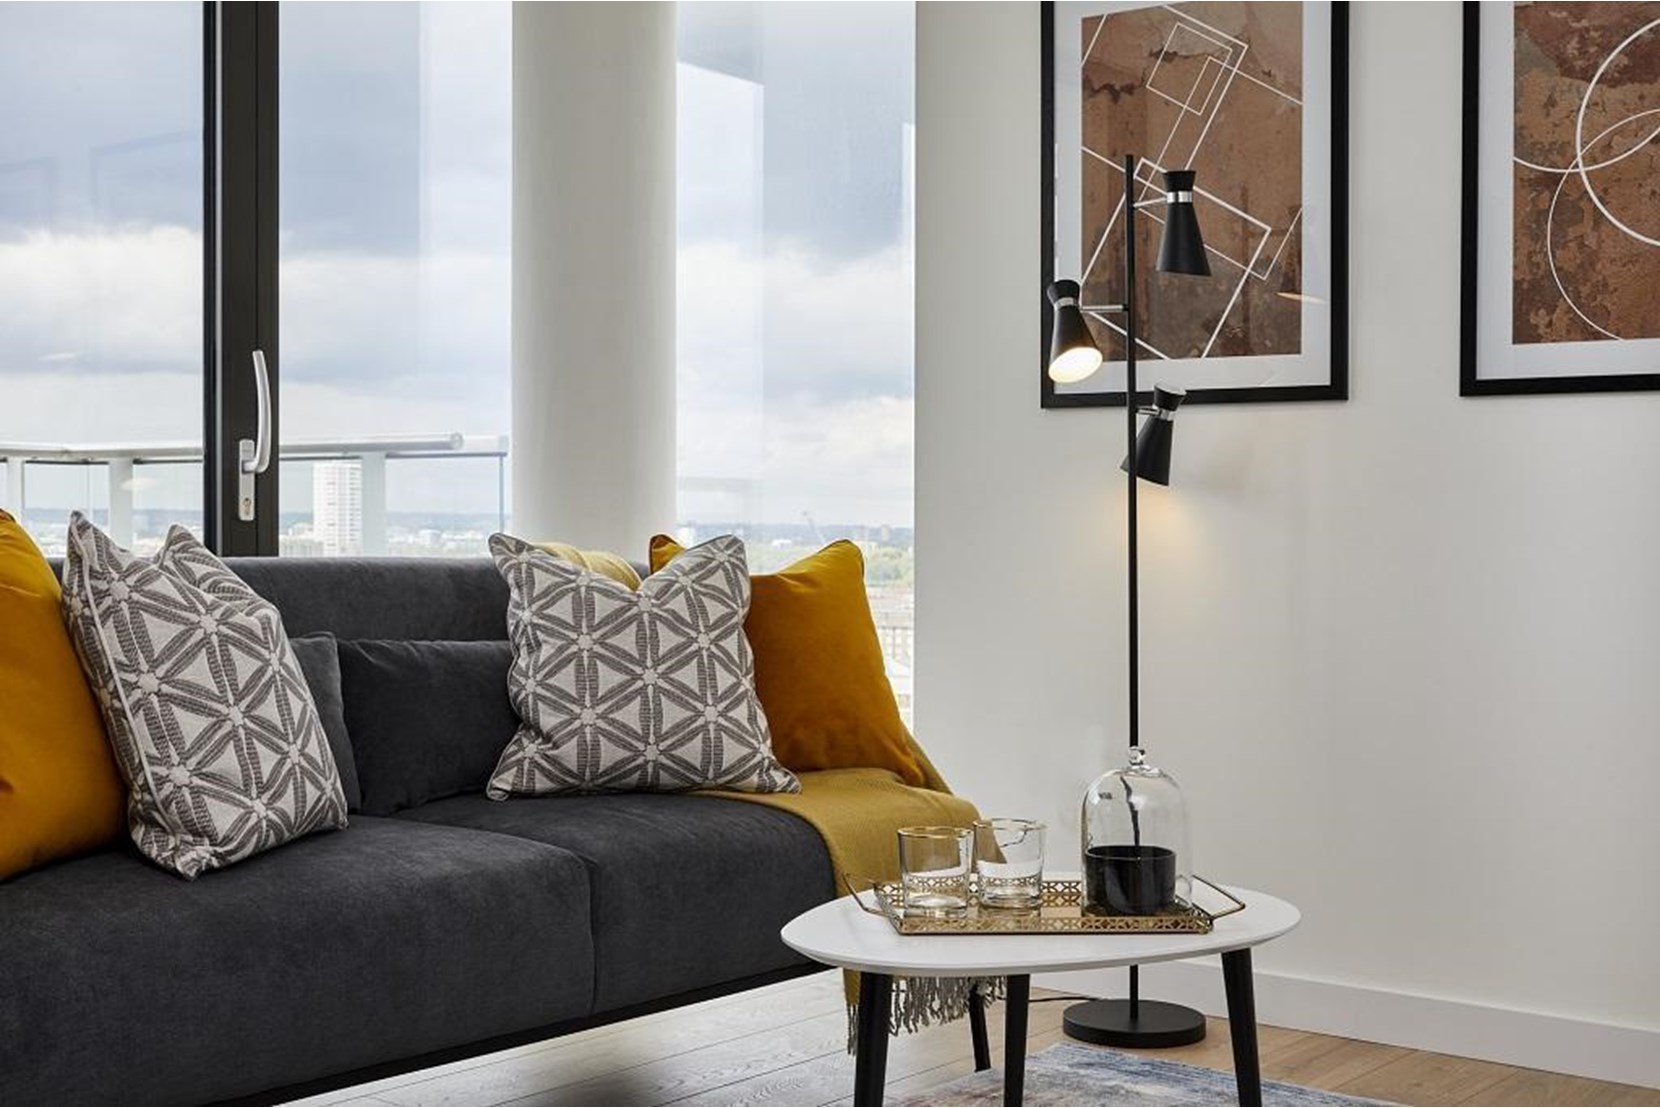 Apartments to Rent by Savills at The Highline, Tower Hamlets, E14, living area